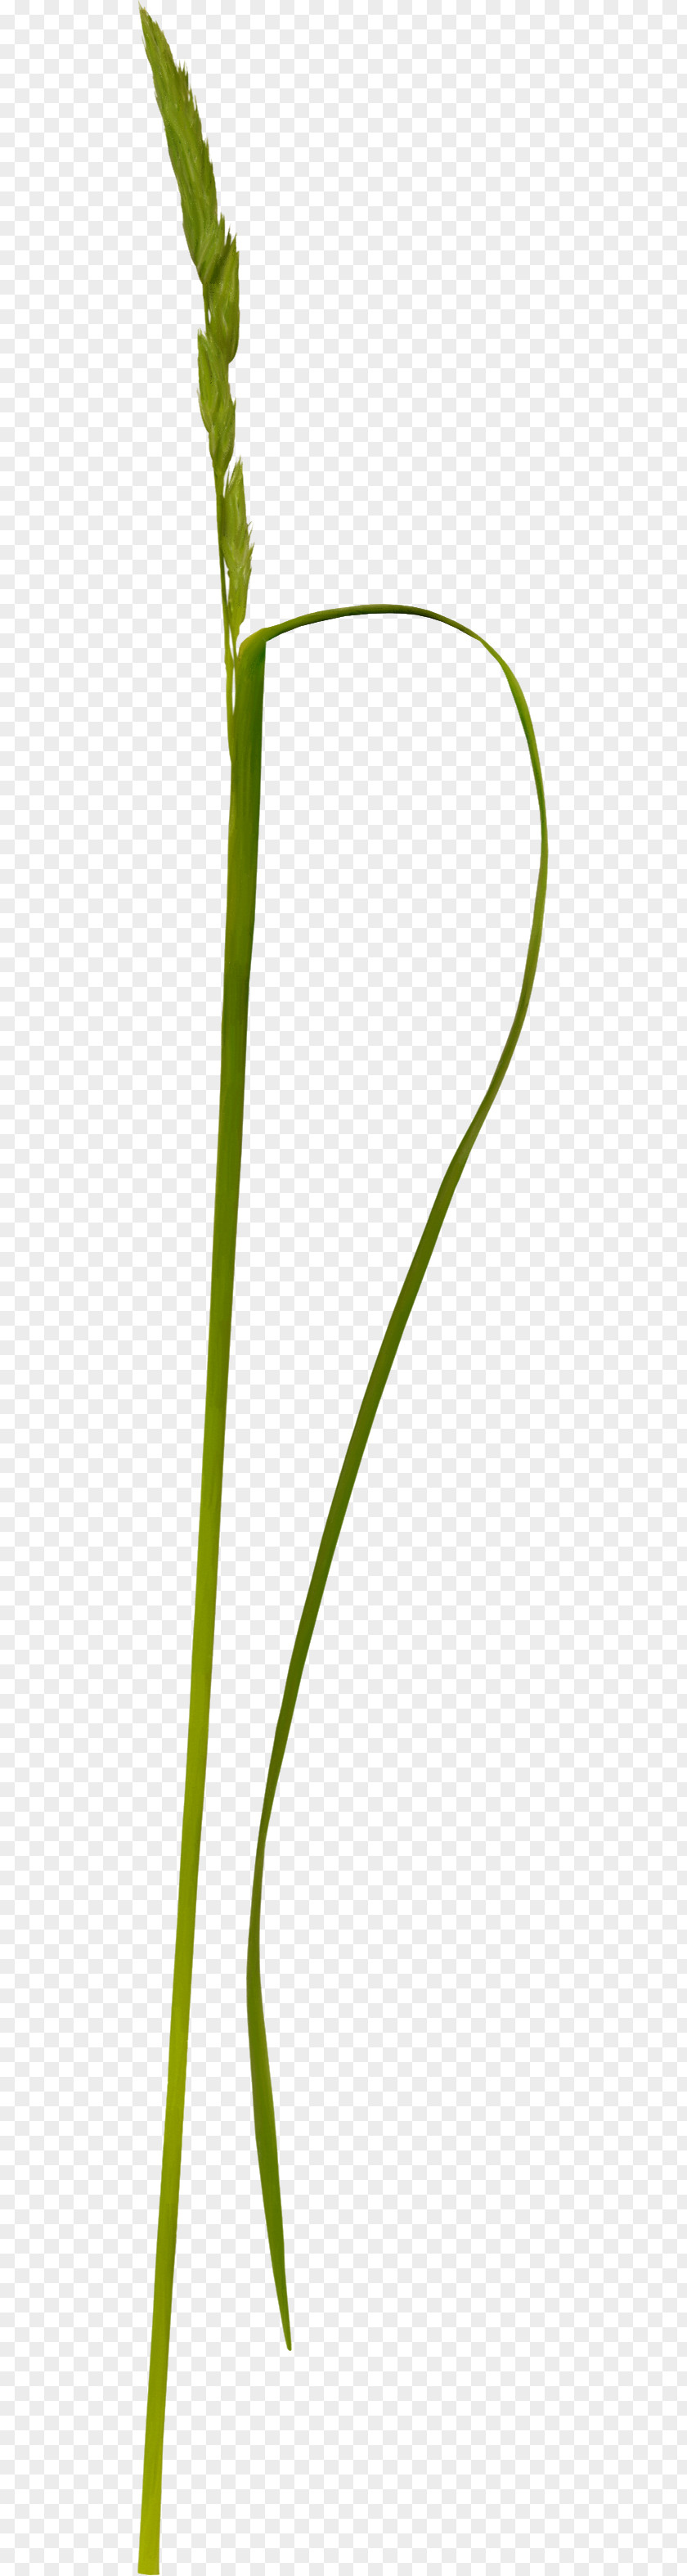 Green Grass Grasses Weed Clip Art PNG